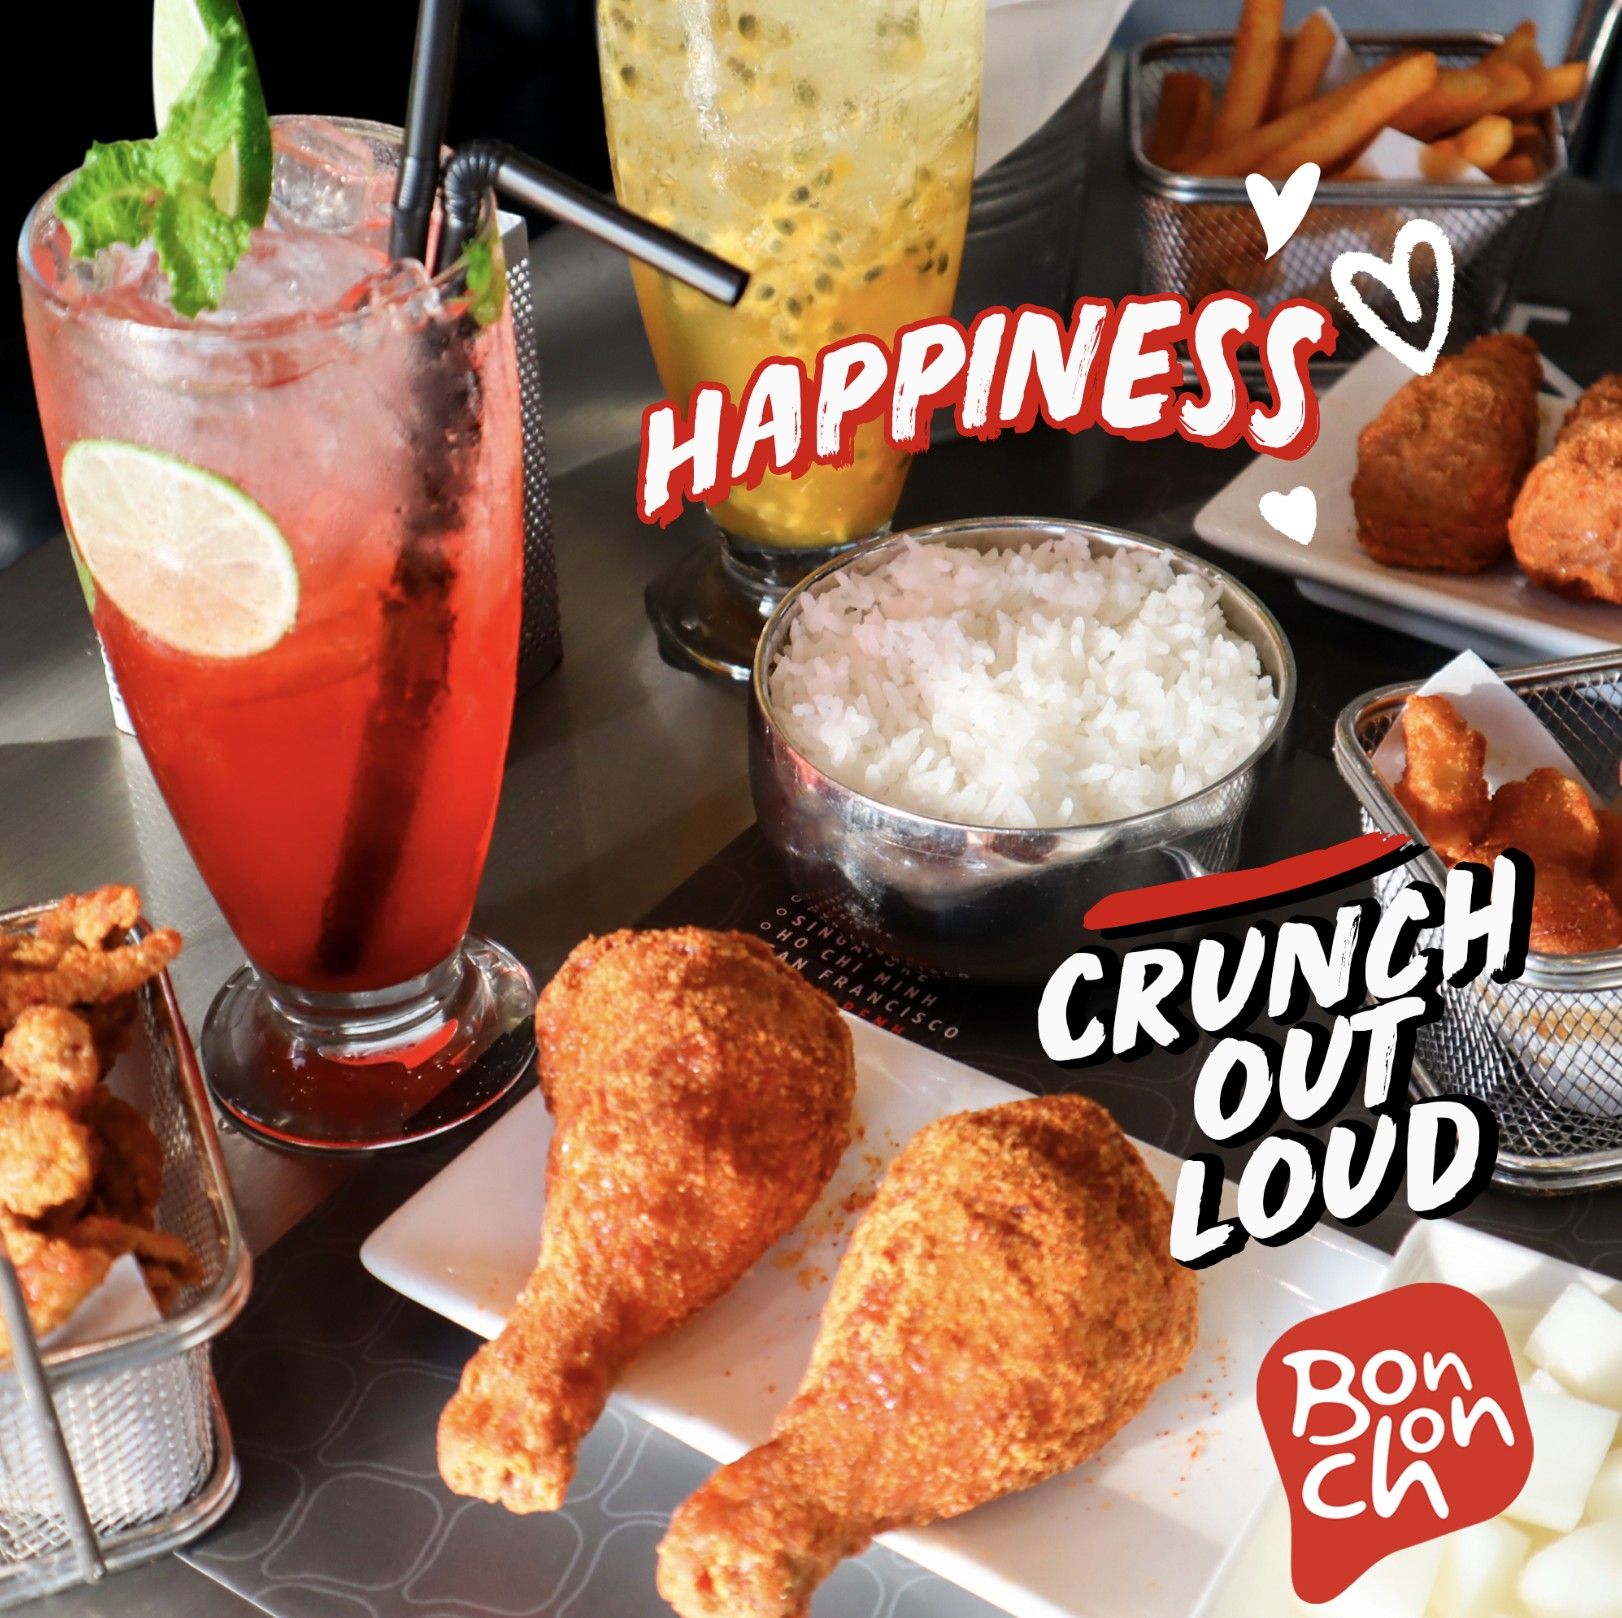 Happiness Crunch Out Loud